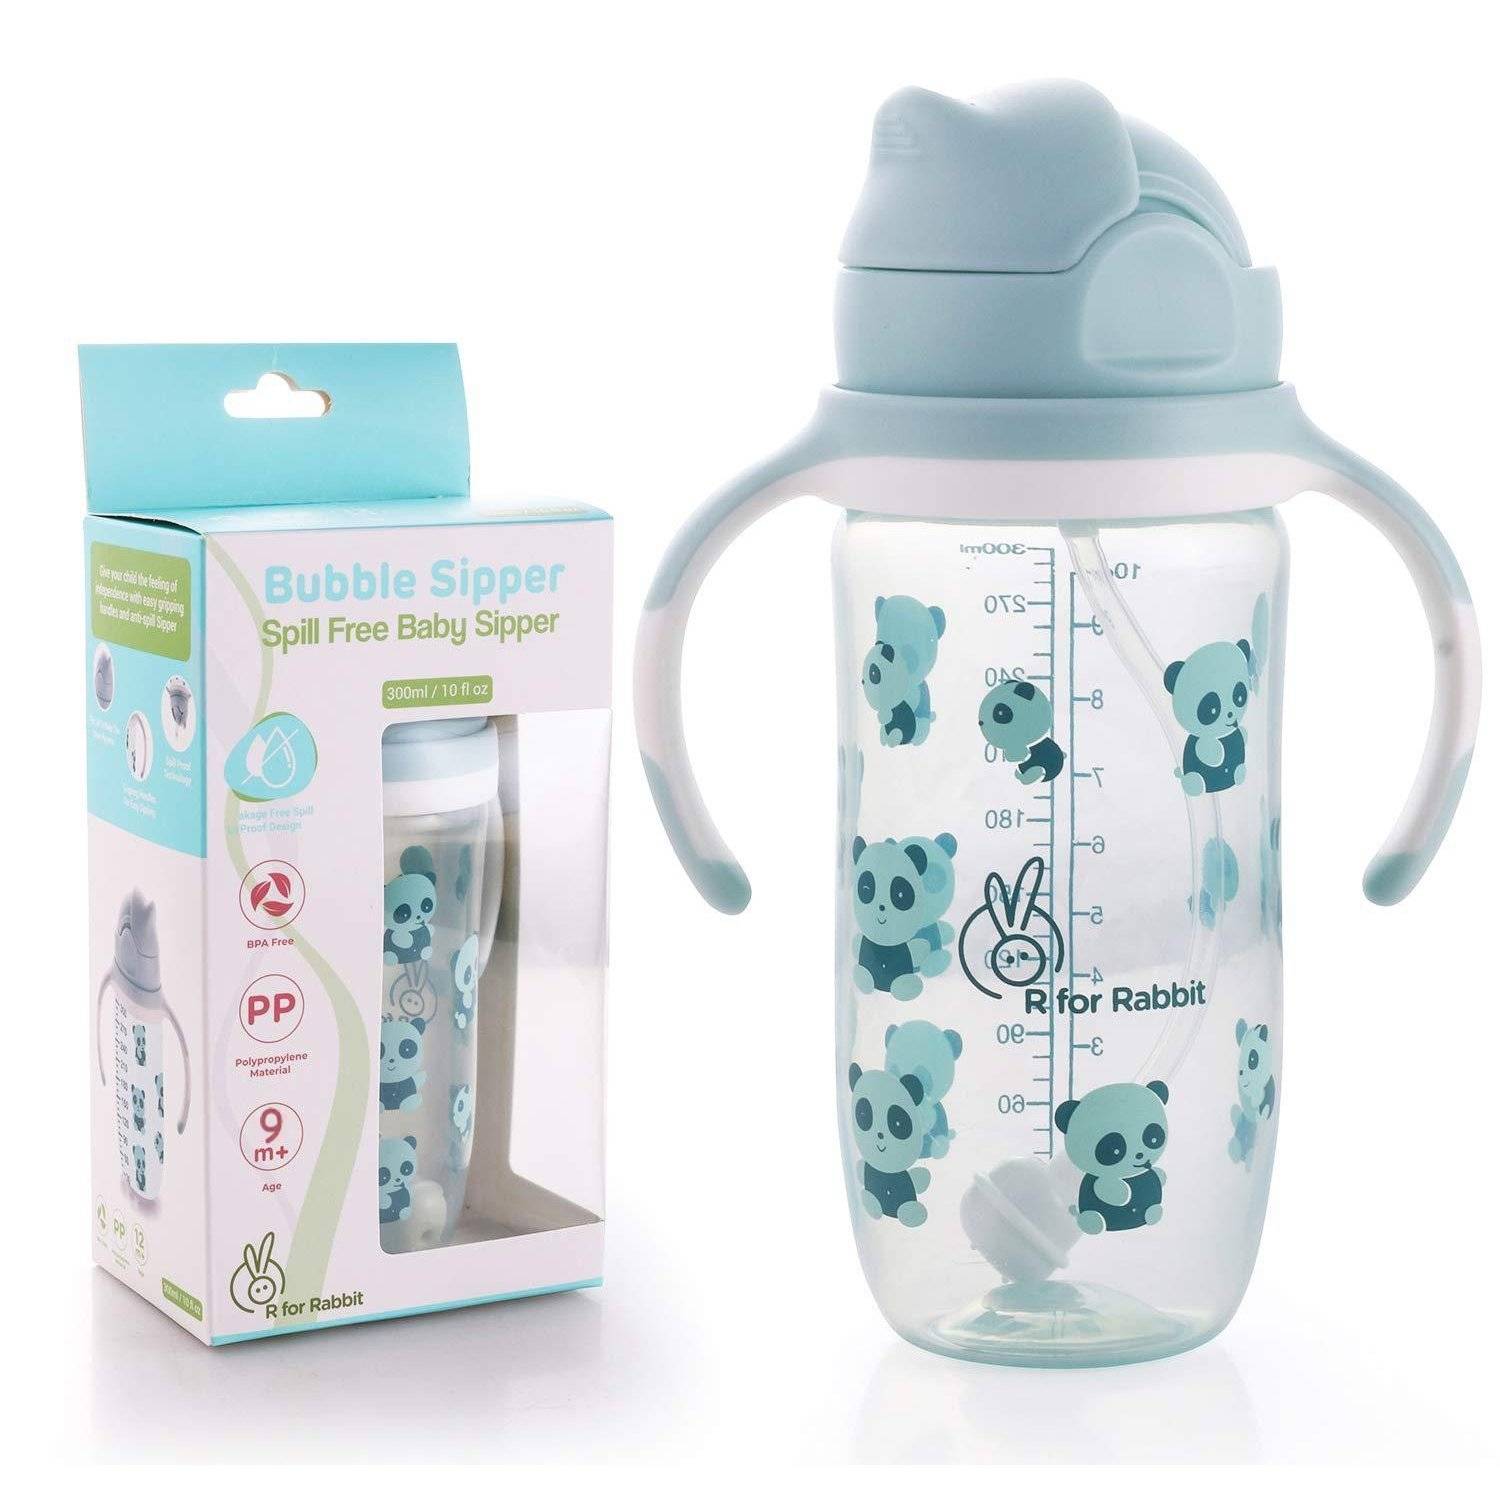 R FOR RABBIT Spill Free Bubble Sipper With Twin Handle For Babies - Blue - 300ml,9m+